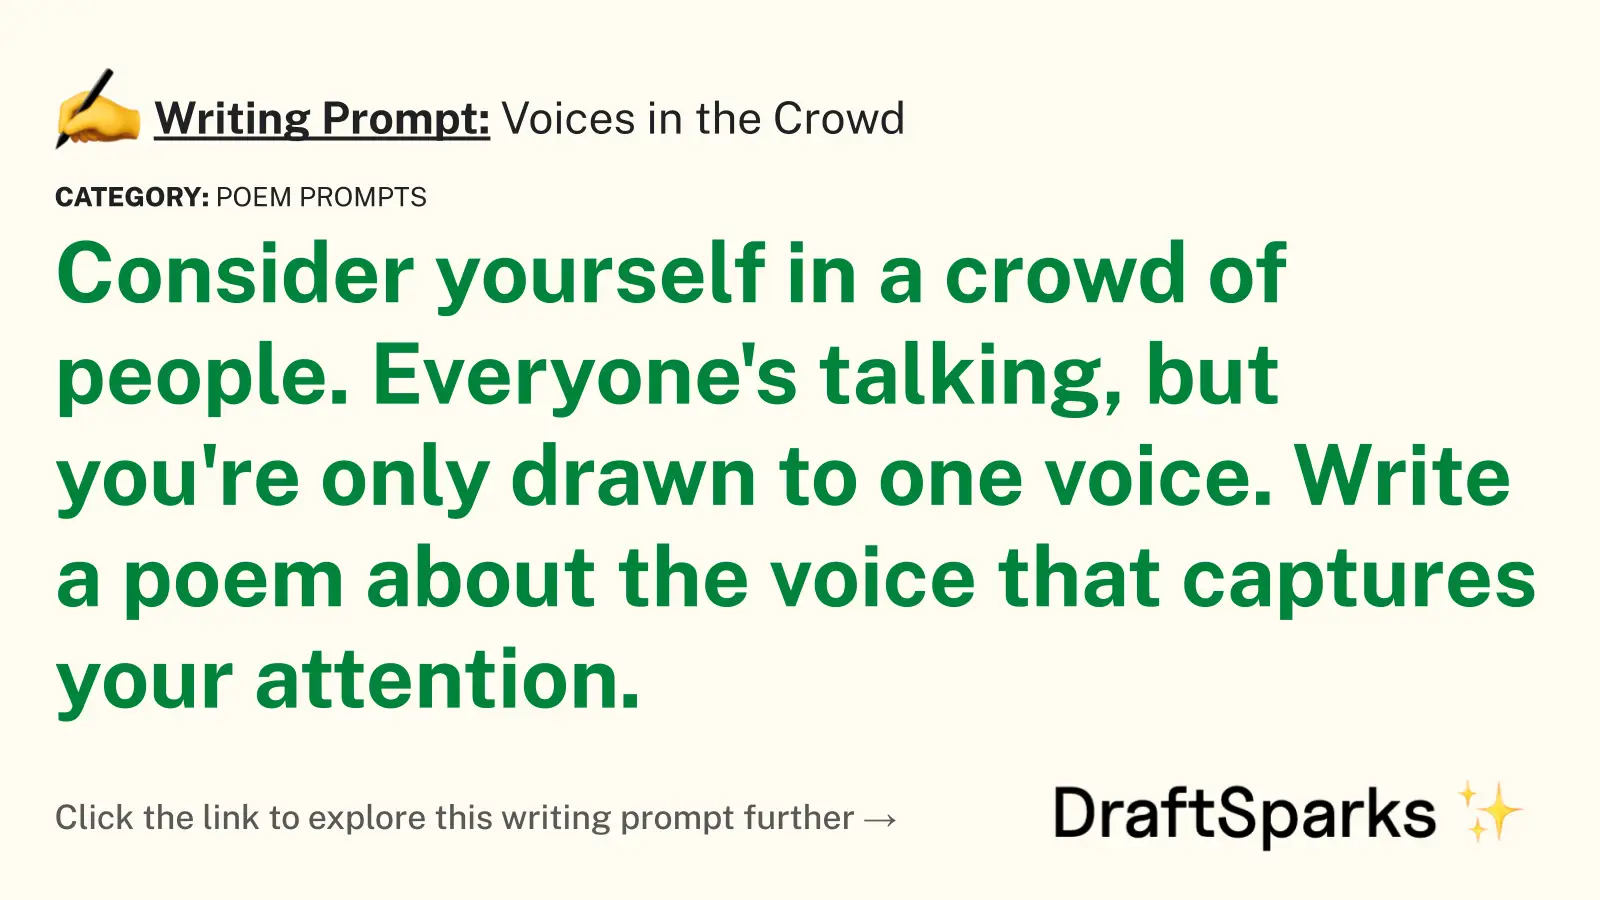 Voices in the Crowd